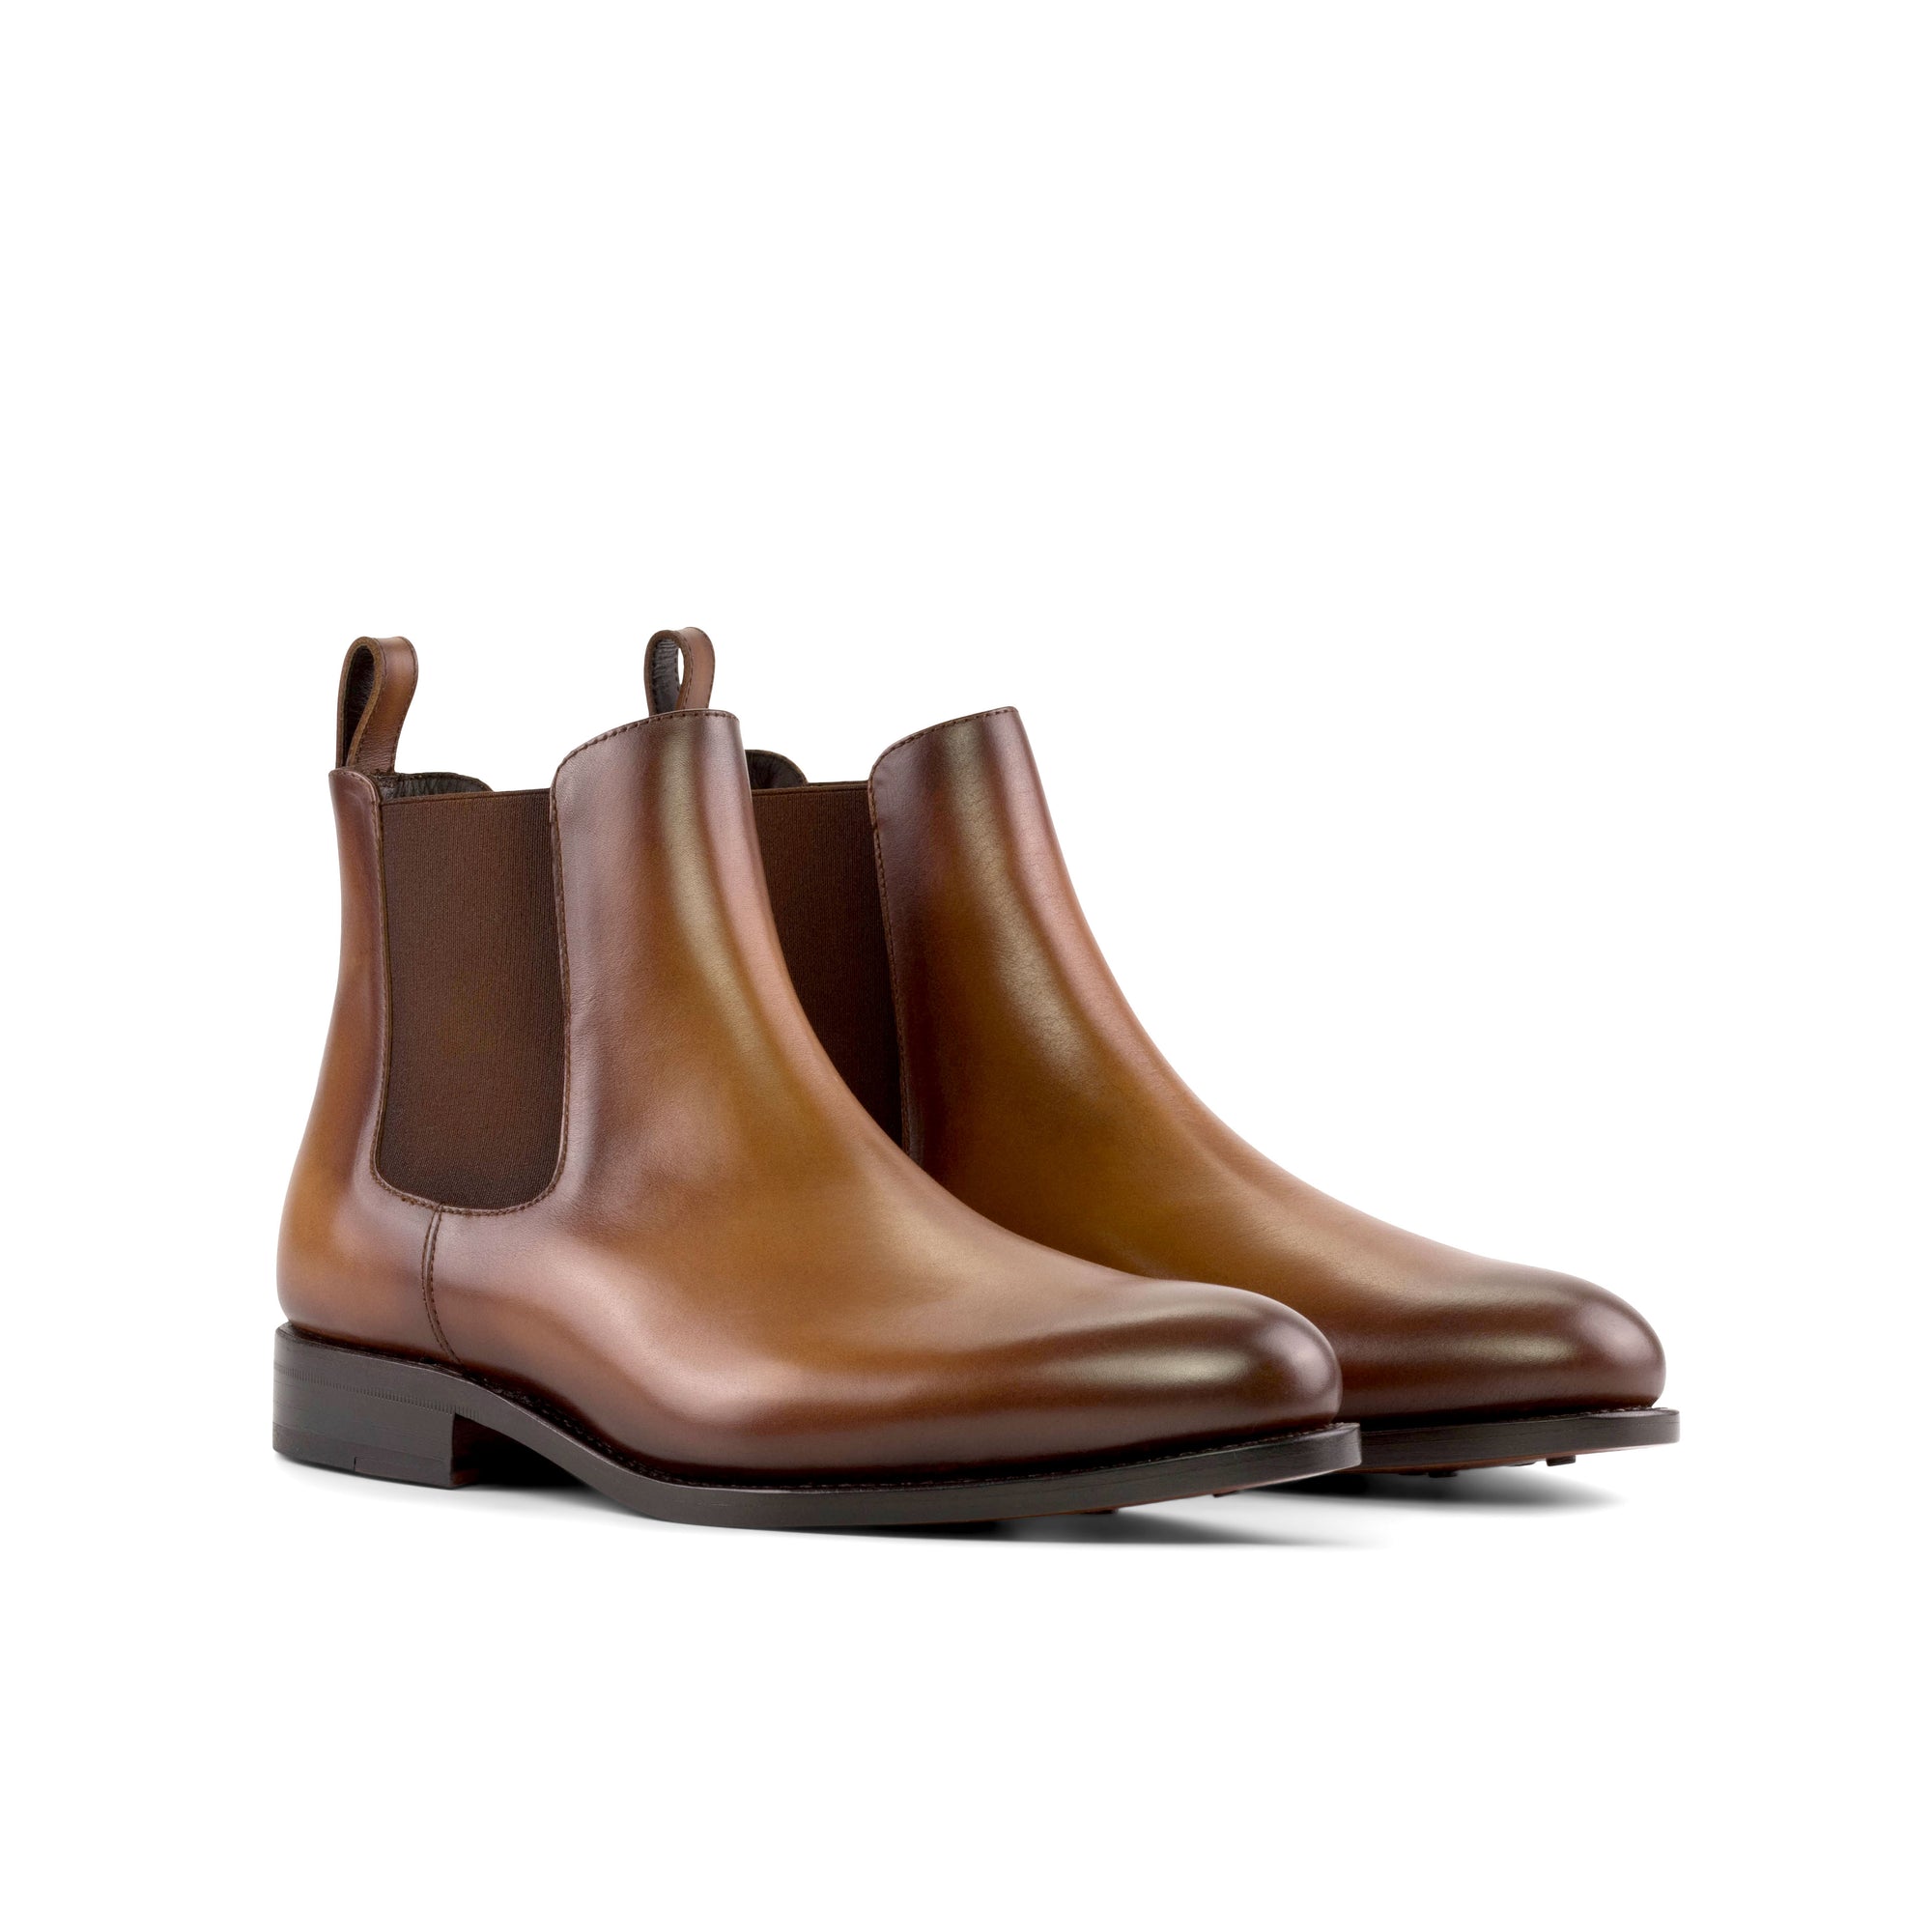 Handmade Burnished Chelsea Boot, Luxury Leather Boots